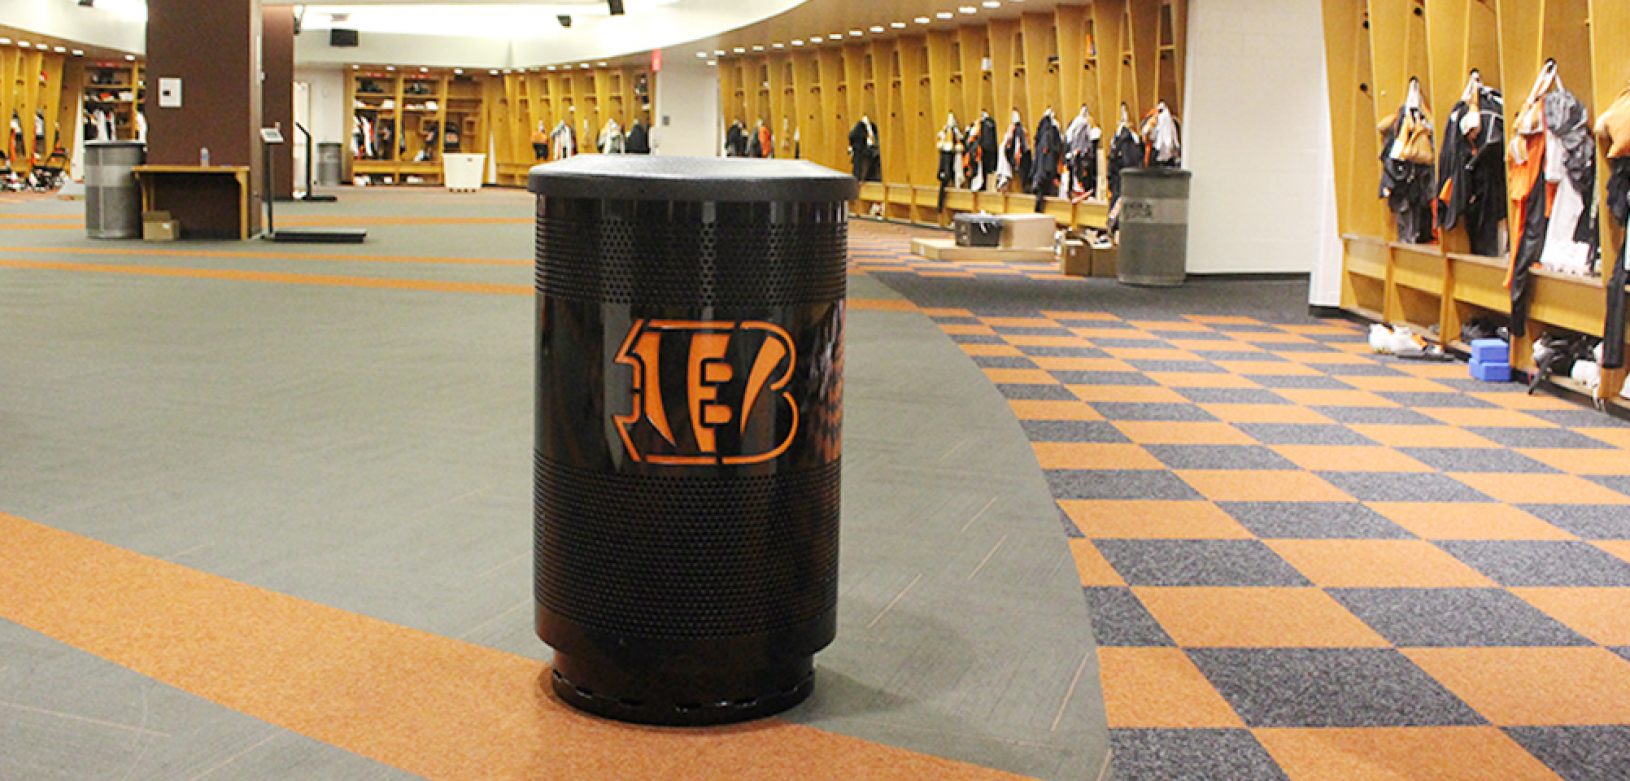 Custom Garbage Can Covers & Outdoor Trash Can Covers